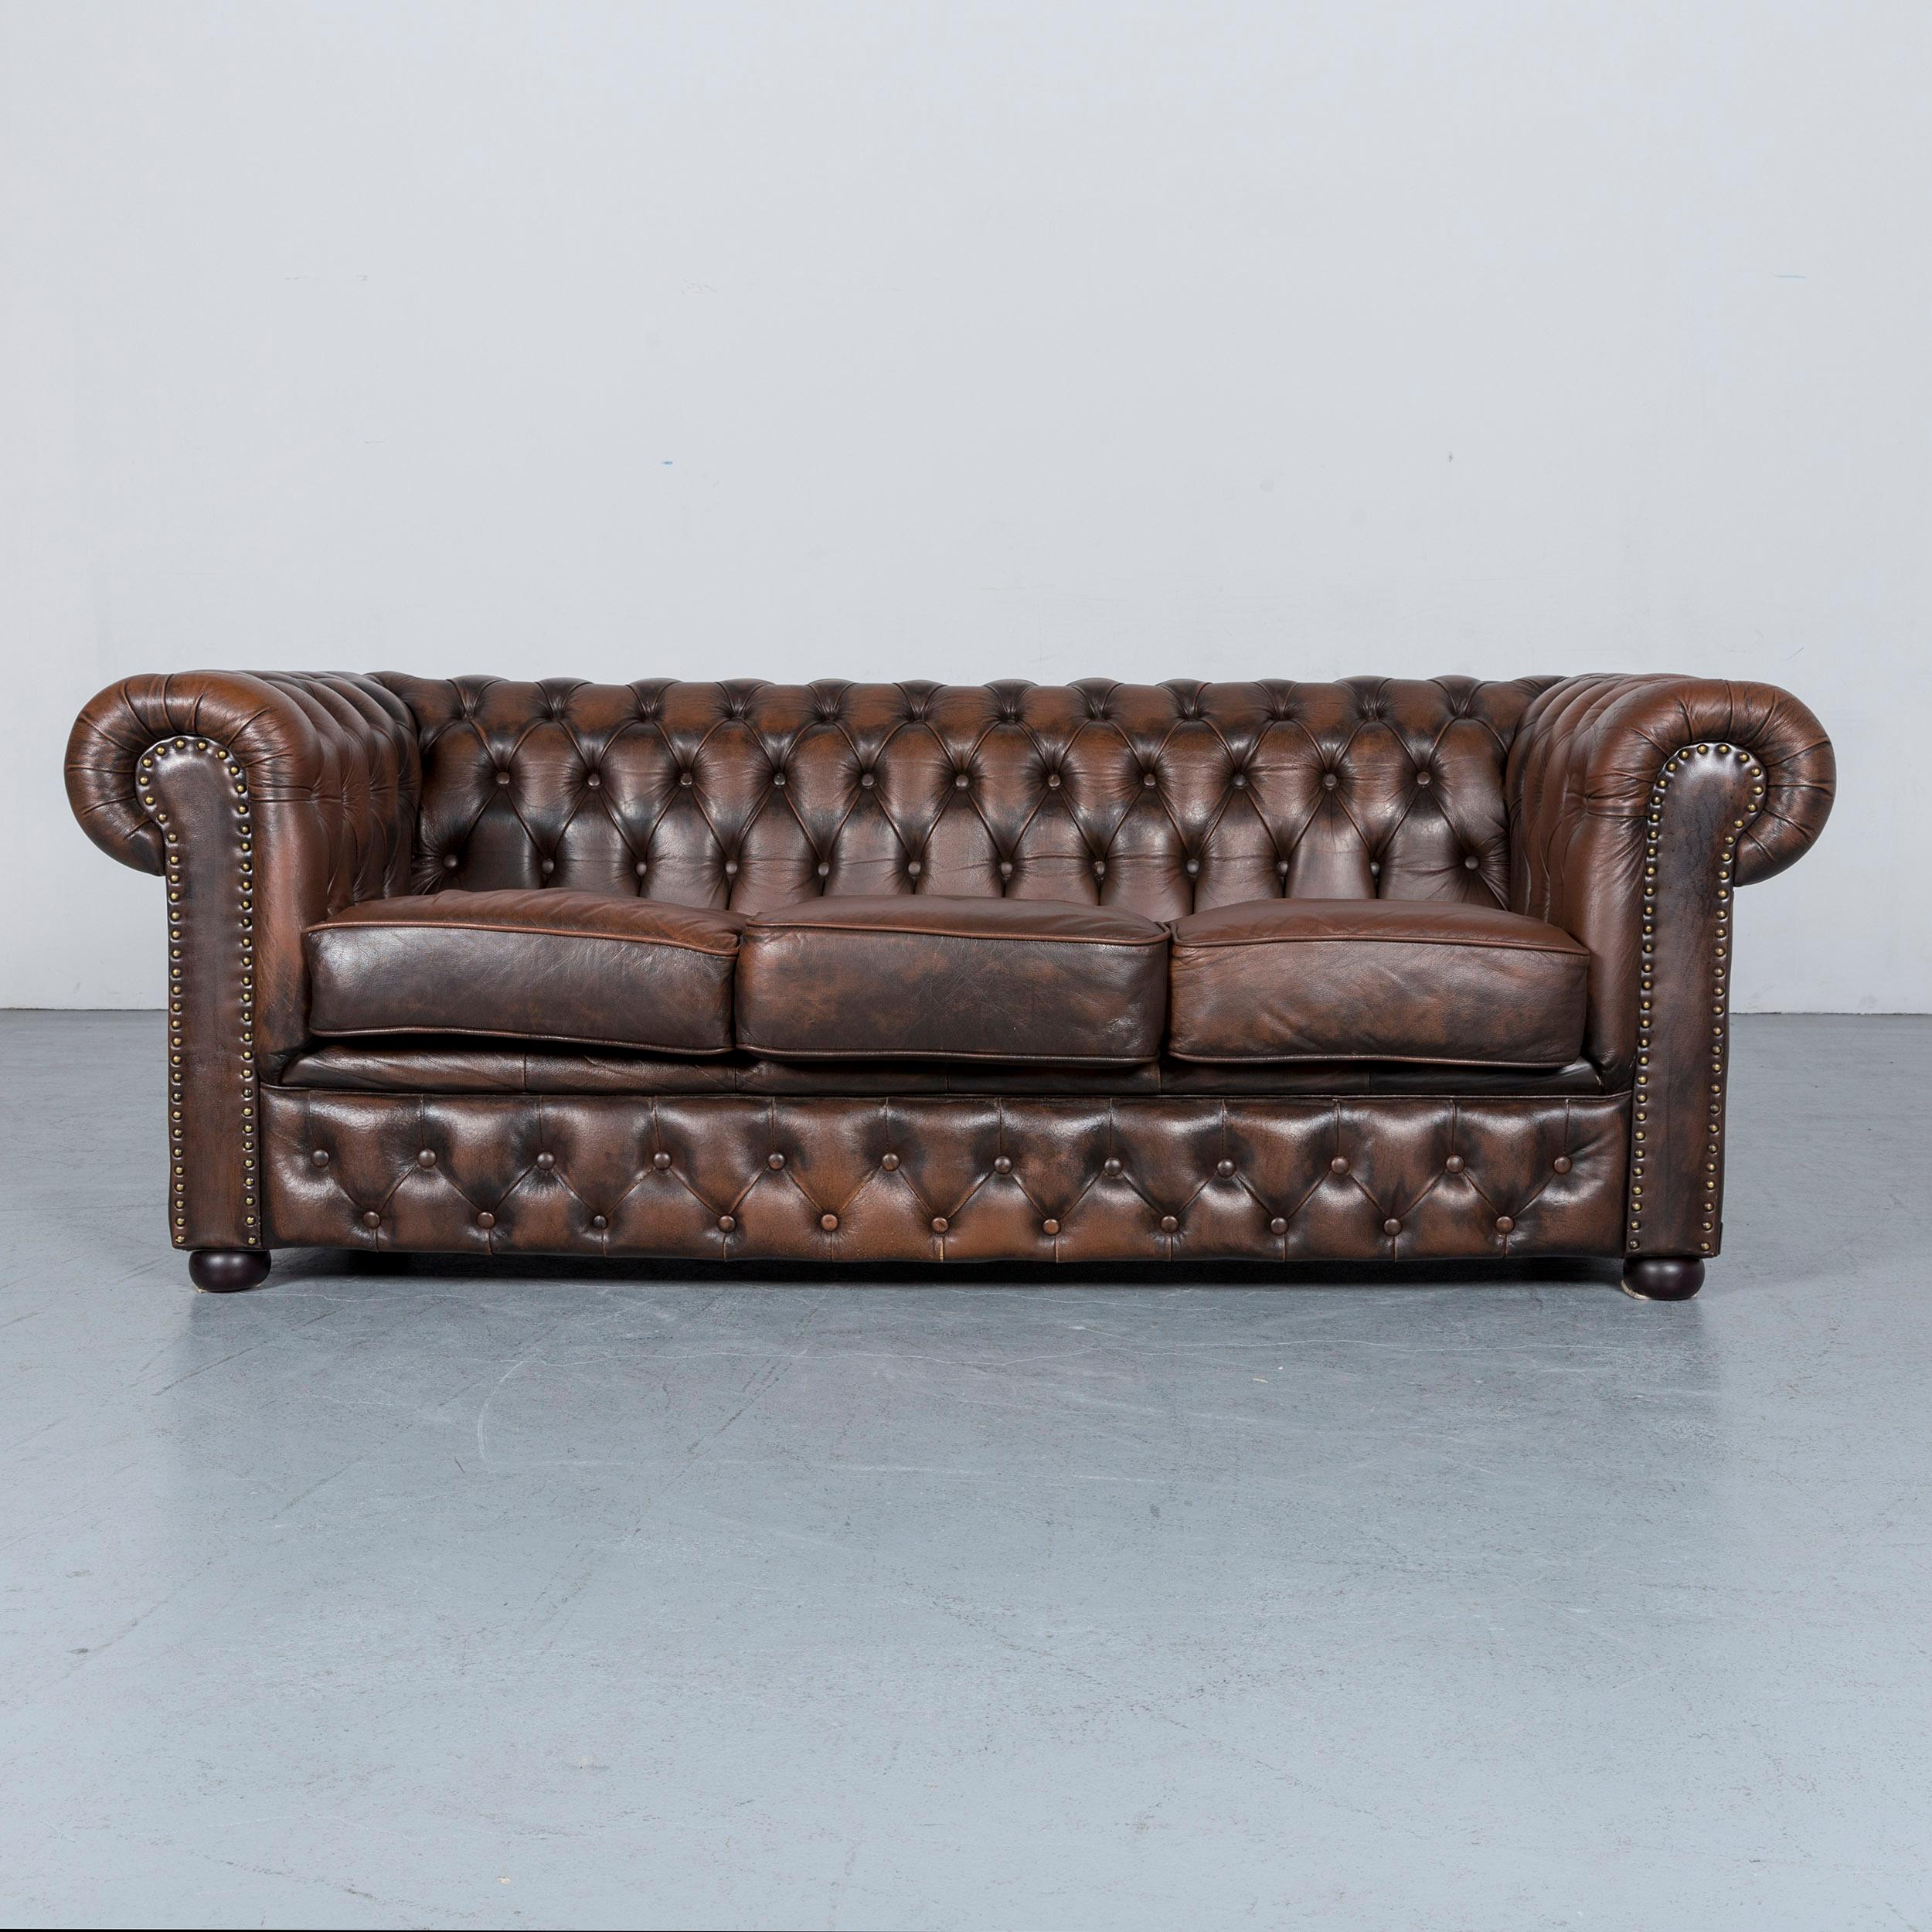 We bring to you an Chesterfield leather sofa brown three-seat armchair set vintage retro
























        